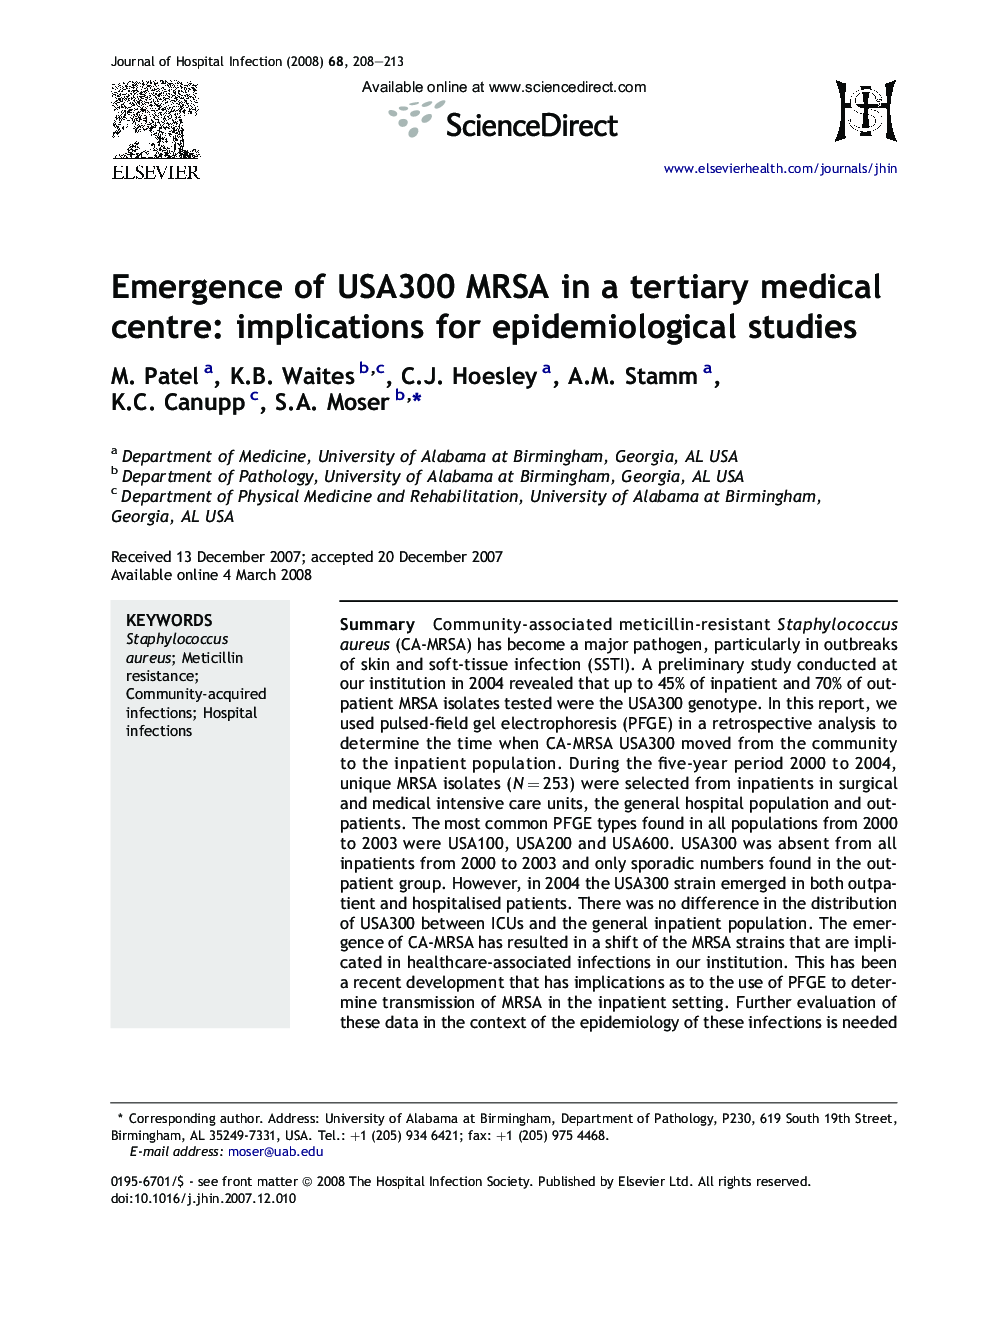 Emergence of USA300 MRSA in a tertiary medical centre: implications for epidemiological studies